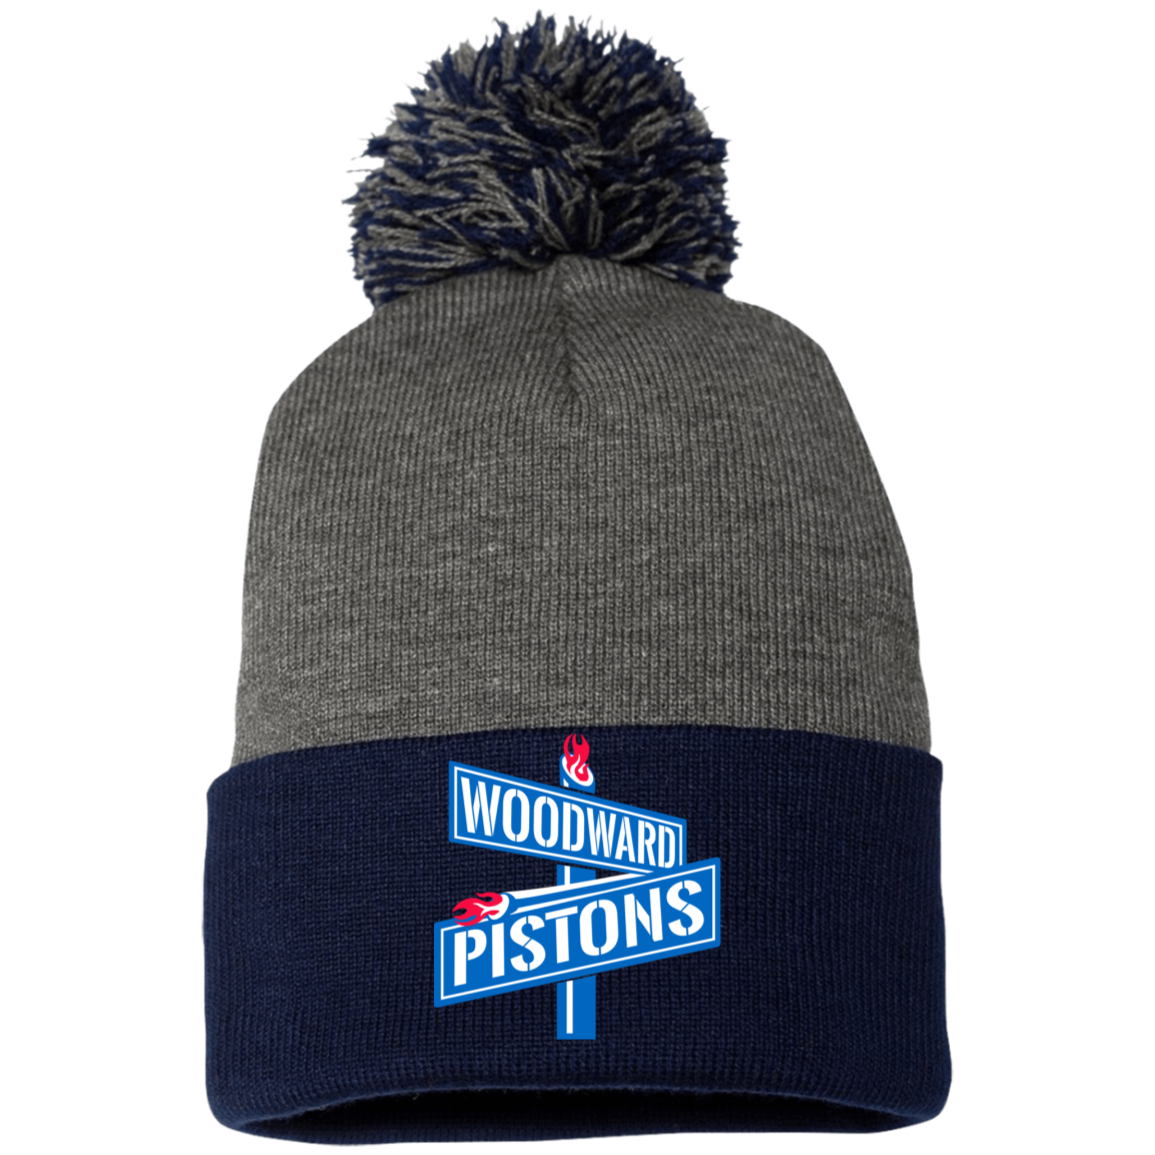 WOODWARD PISTONS Embroidered Pom Pom Knit Cap